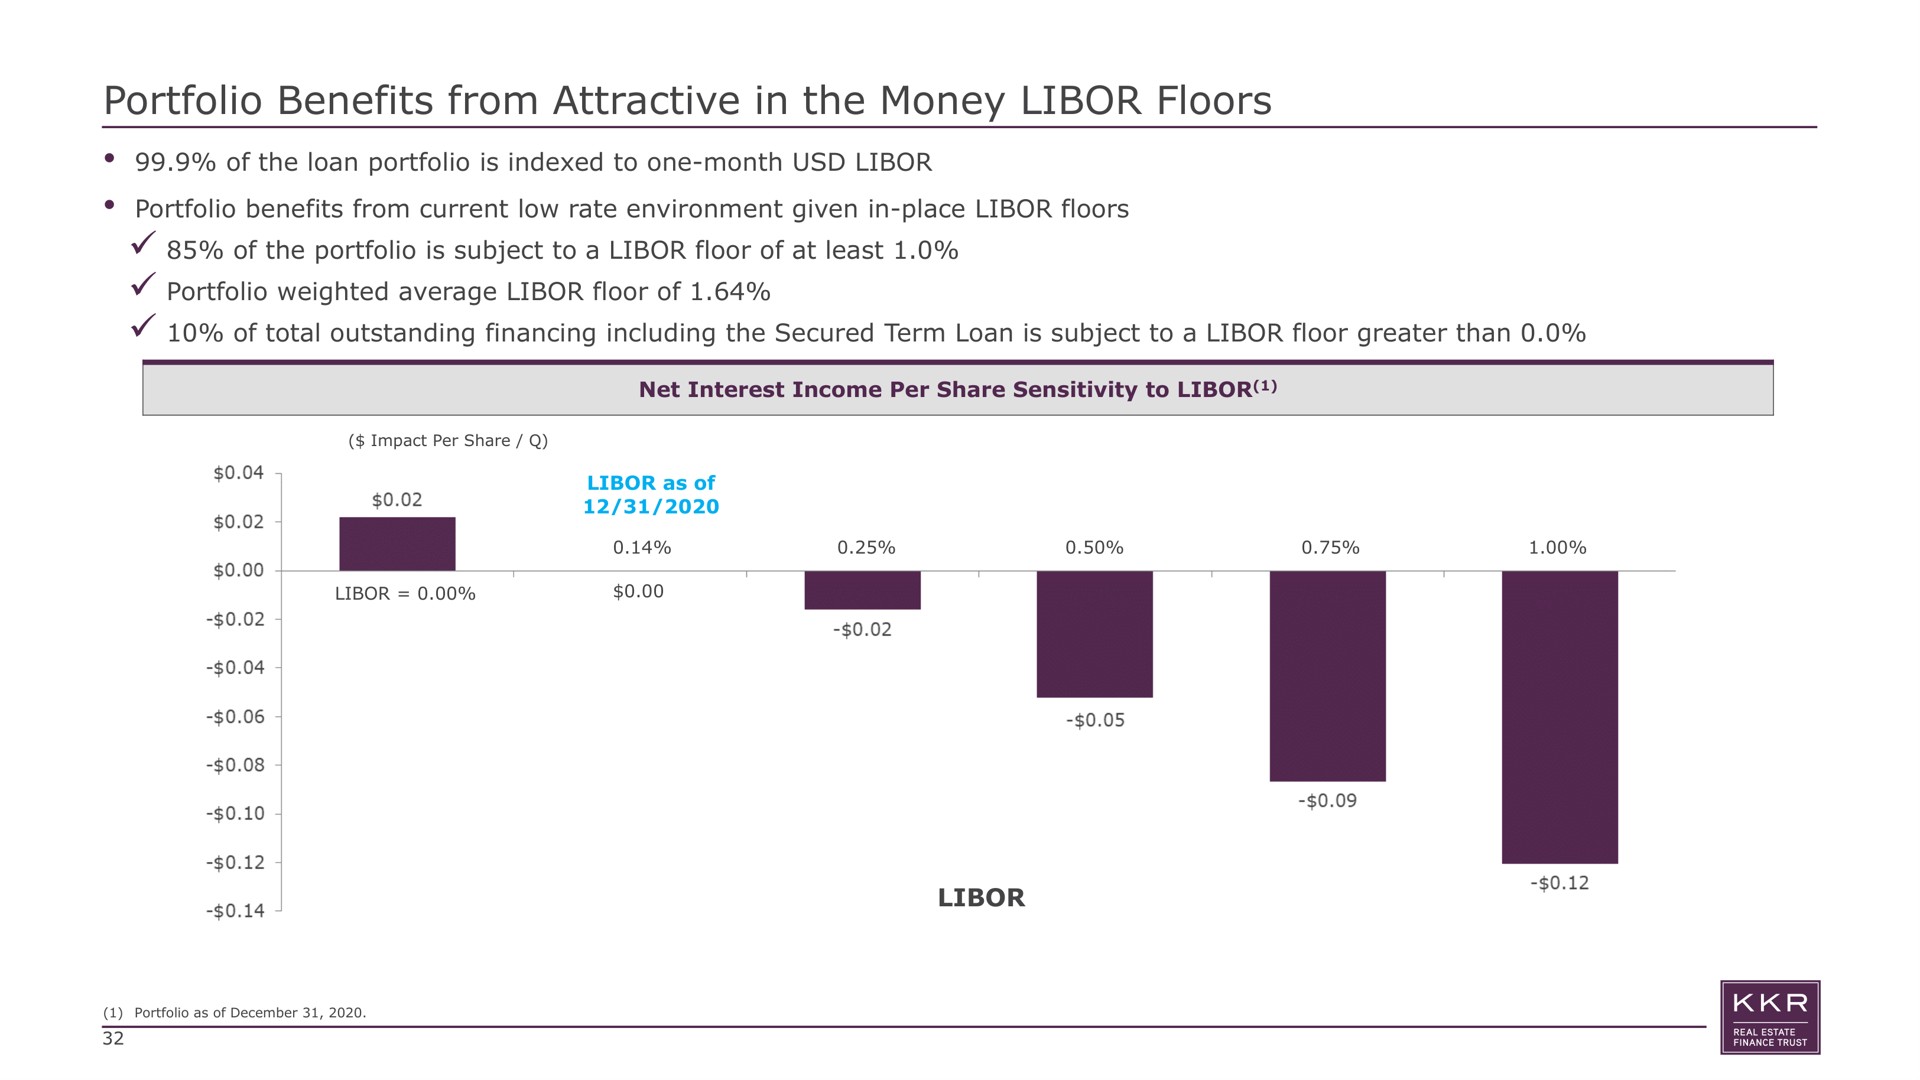 portfolio benefits from attractive in the money floors of the loan portfolio is indexed to one month portfolio benefits from current low rate environment given in place floors of the portfolio is subject to a floor of at least portfolio weighted average floor of of total outstanding financing including the secured term loan is subject to a floor greater than as | KKR Real Estate Finance Trust